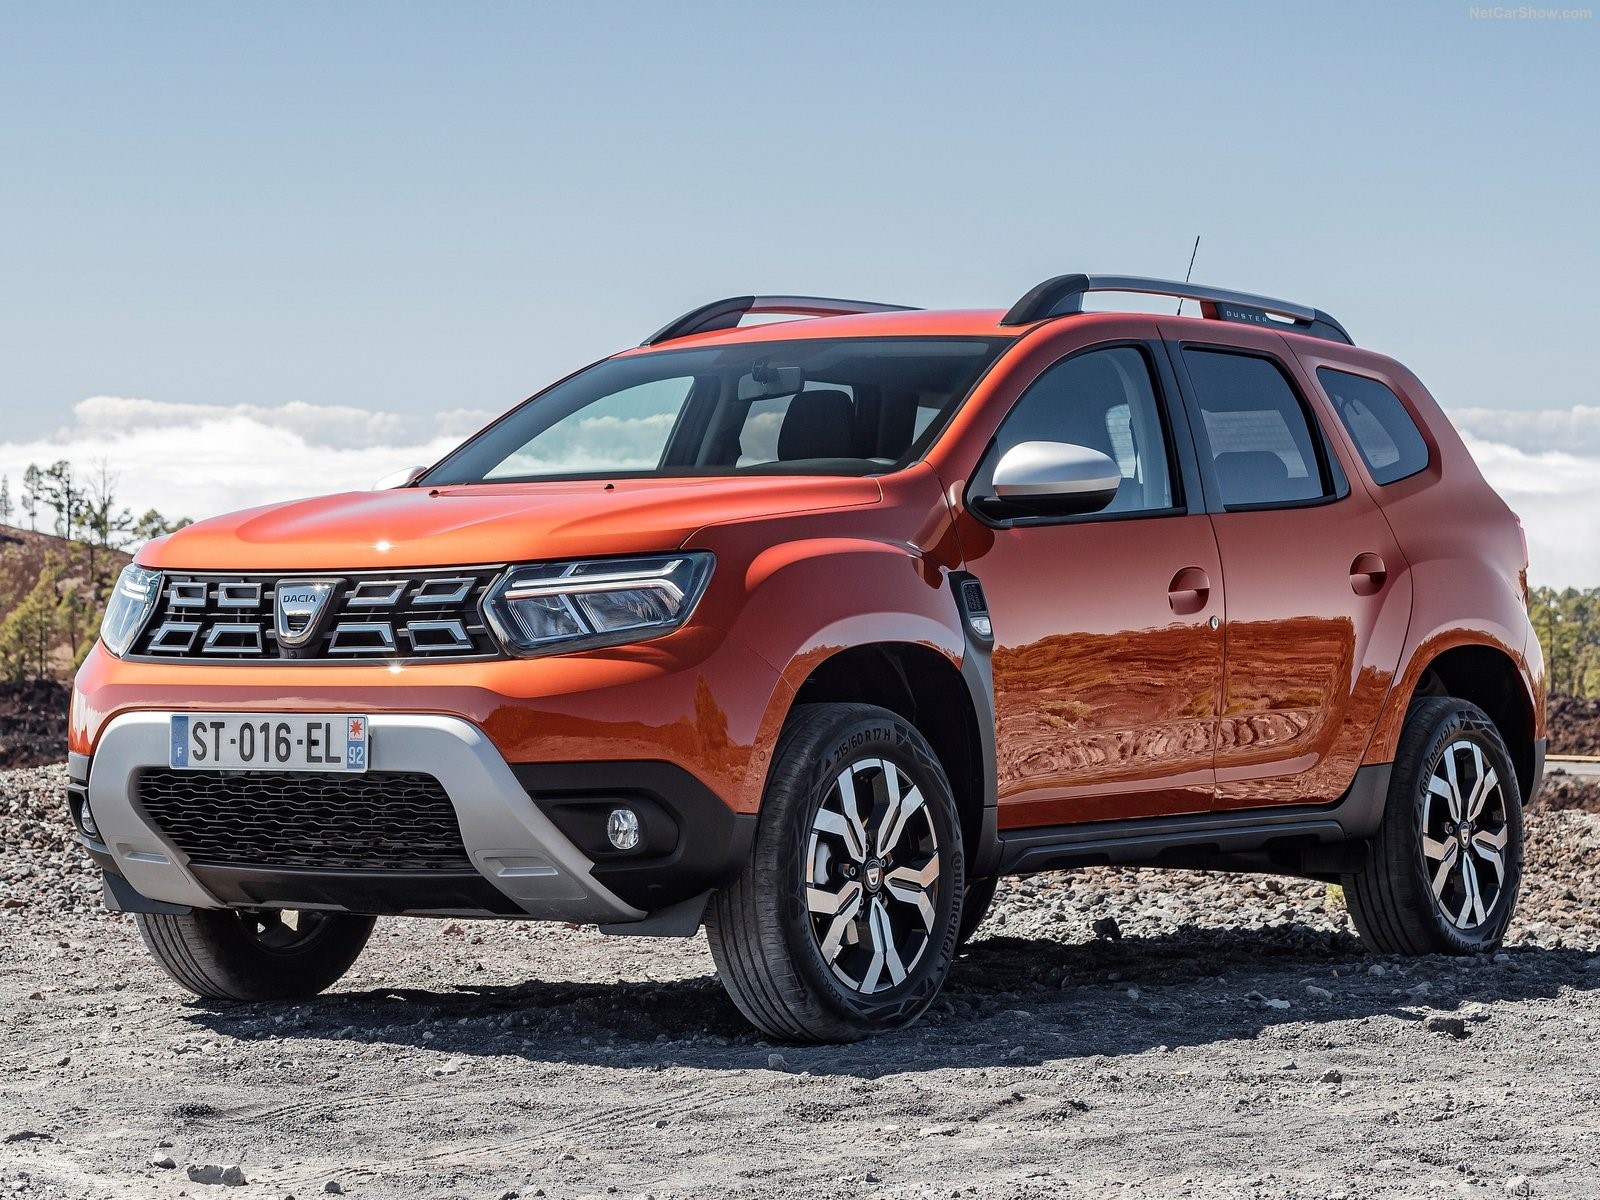 Dacia Duster Gets A Low-Ride Sporty Makeover With CarPoint Yellow Edition